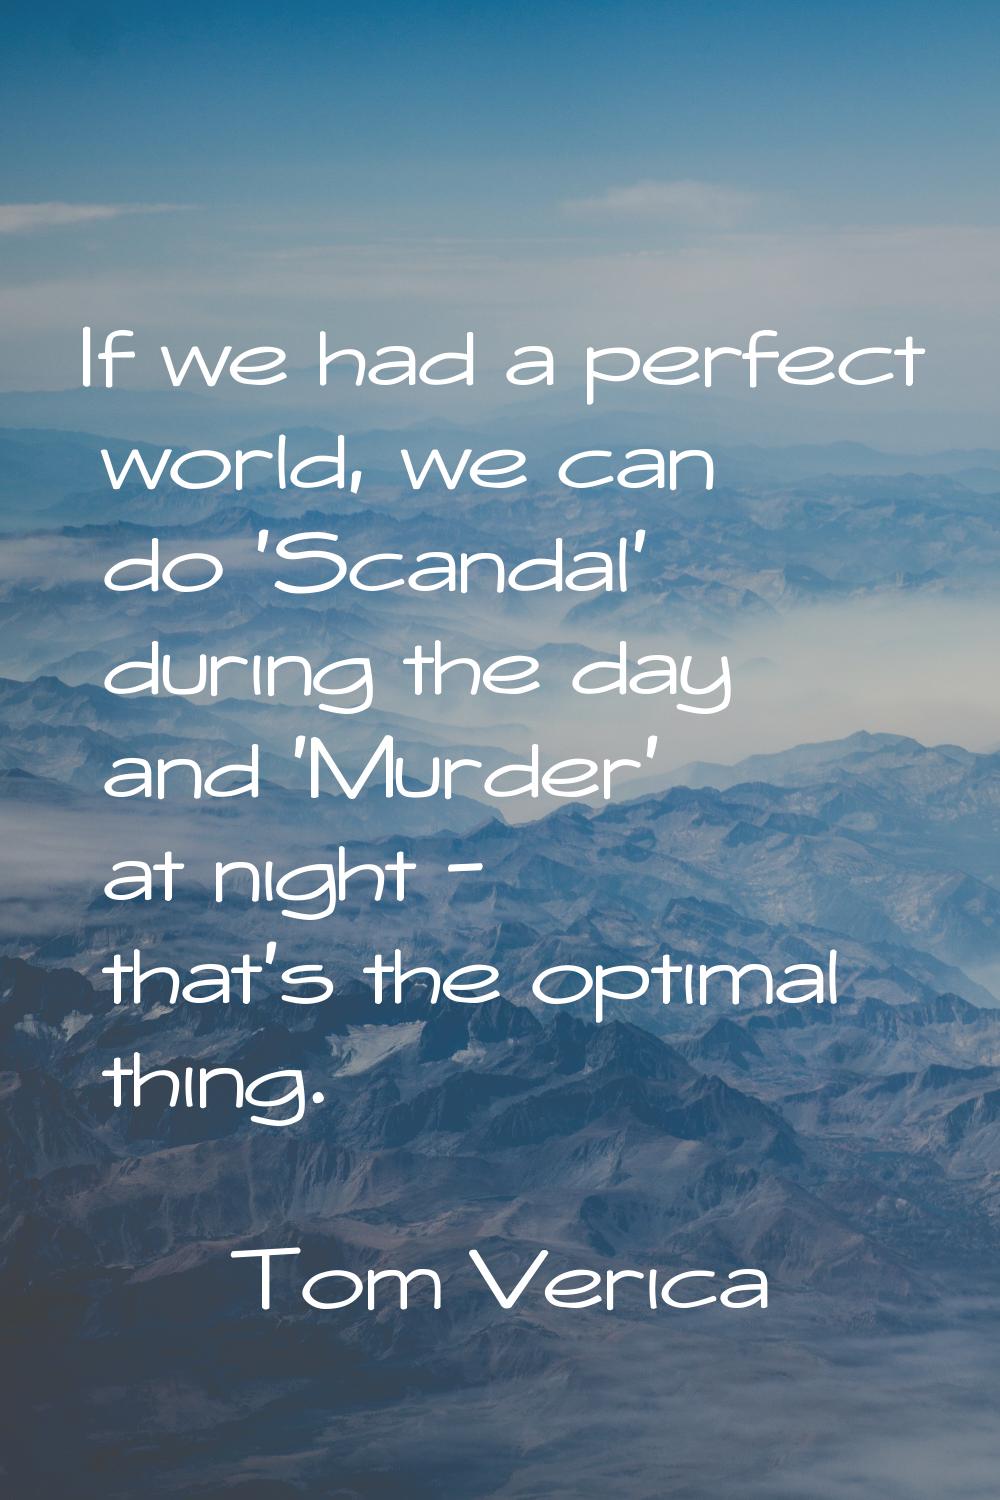 If we had a perfect world, we can do 'Scandal' during the day and 'Murder' at night - that's the op